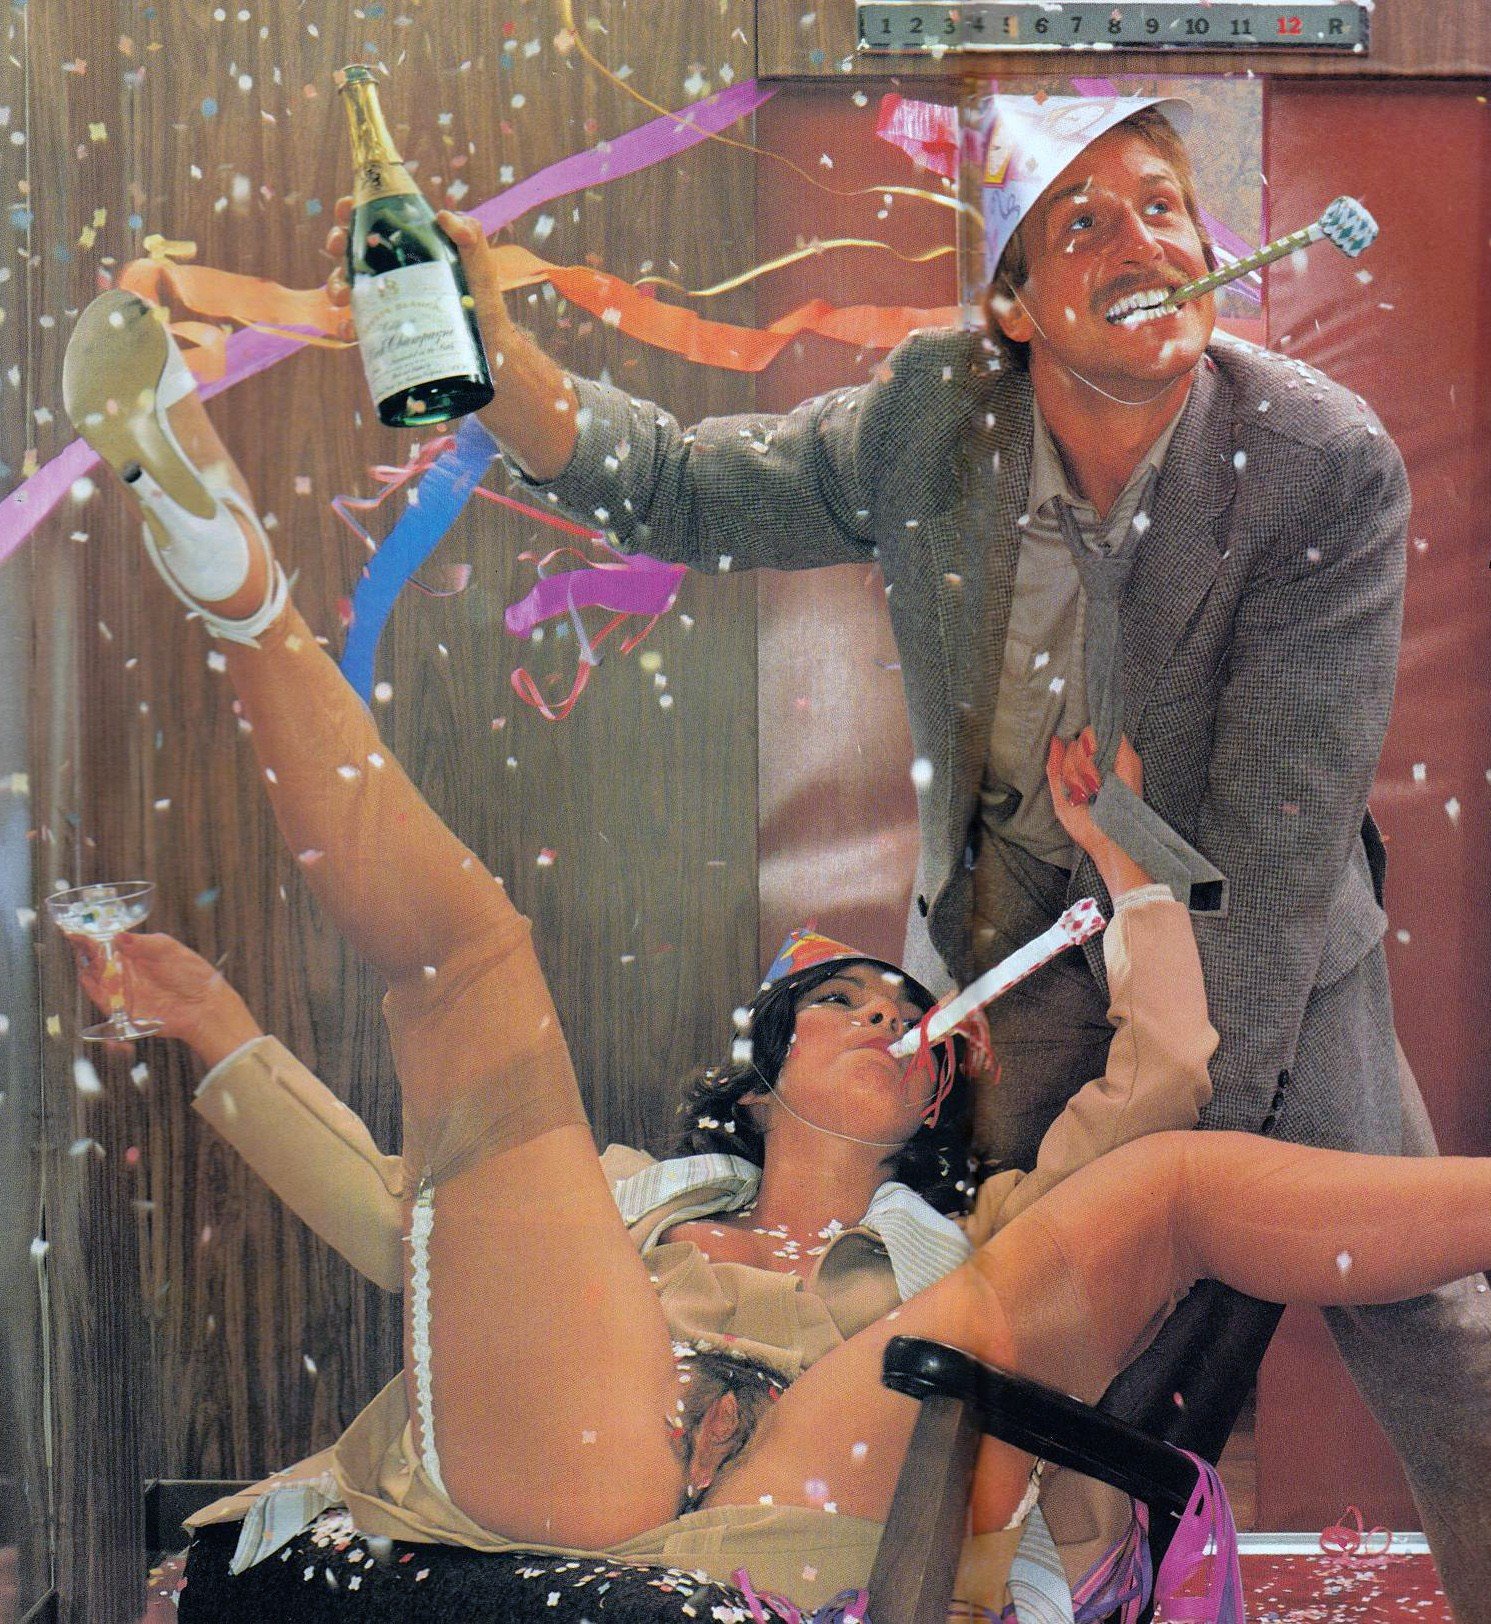 Photo by retrofucking with the username @retrofucking,  December 27, 2018 at 10:24 PM. The post is about the topic Retro Porn and the text says 'New Year's Eve Office Party Orgy 
http://www.retro-fucking.com #happynewyear #newyearseve #fun #party #alcohol #officeparty #booze #80s #1980s #hustler #brigittemonet #barbarapeckinpaugh #jacquelinebrooks #kissing #hairy #bush #muff #frenchkiss..'